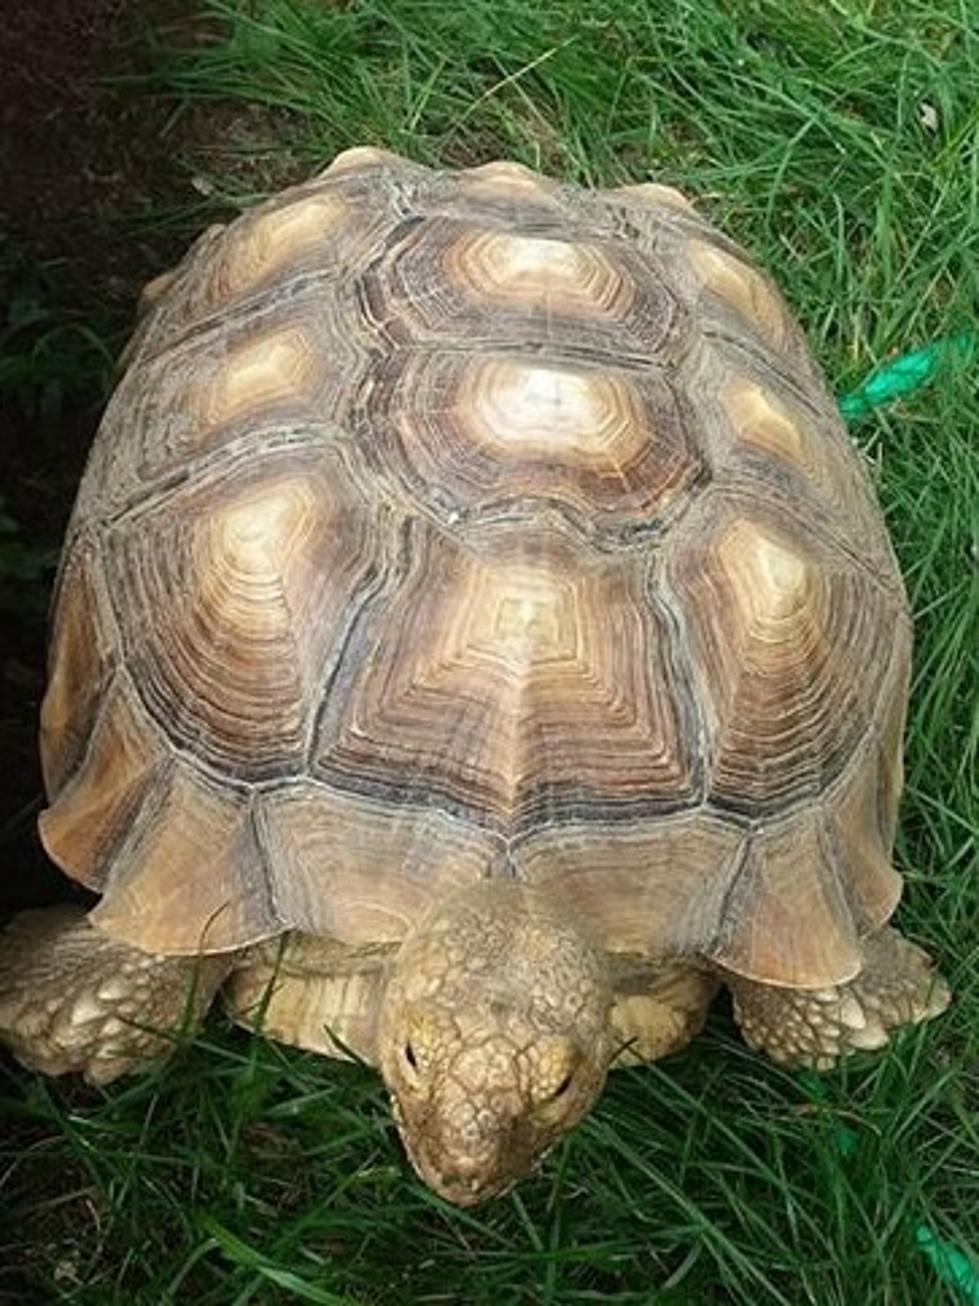 Parchment Woman Needs Help Finding Missing Tortoise